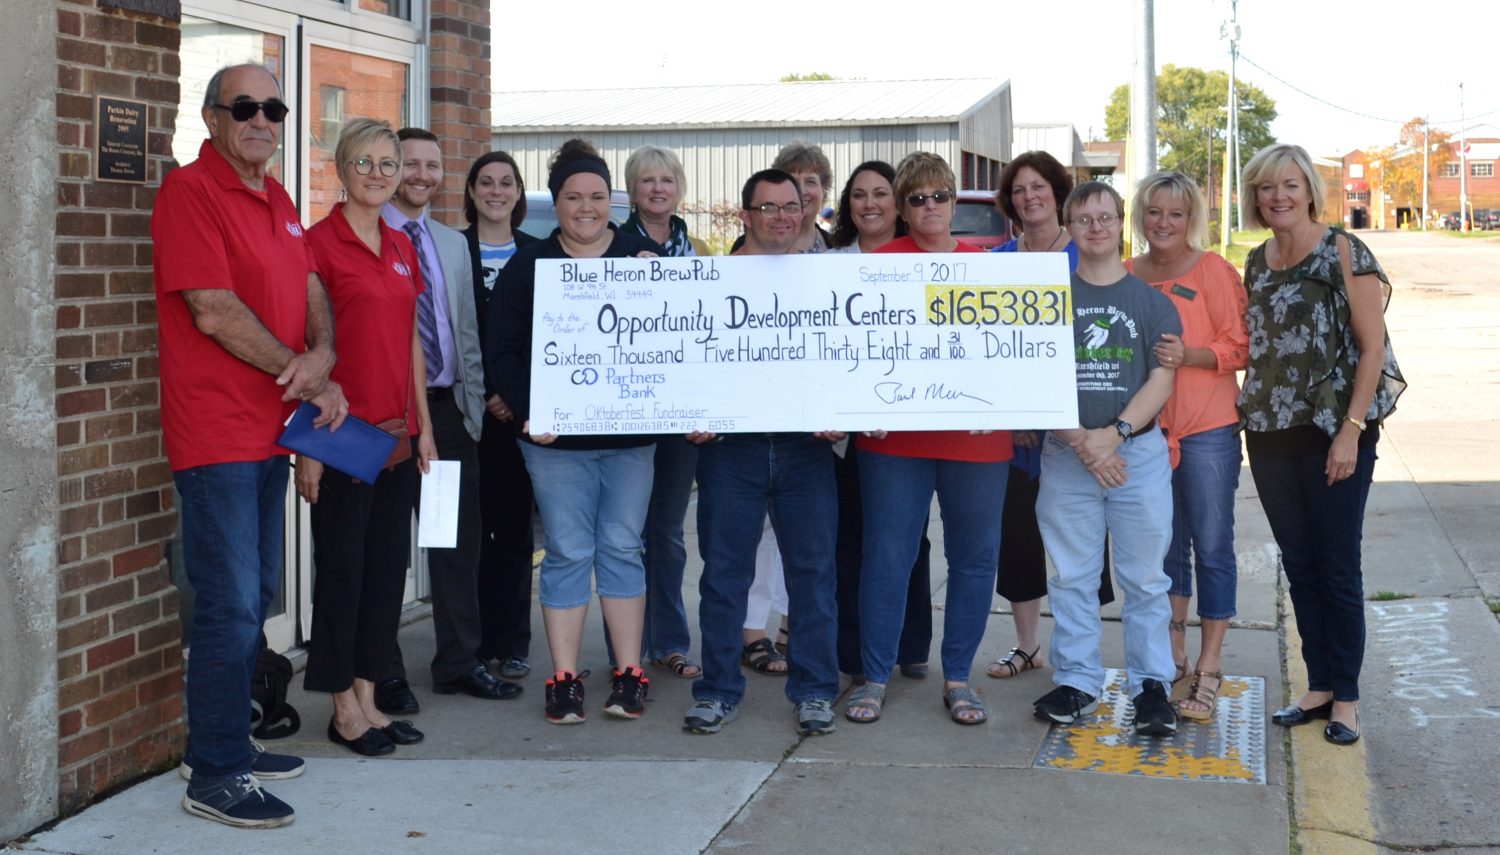 Posing with a check for the more than $16,500 raised during the Blue Heron BrewPub’s Oktoberfest on Sept. 9 are representatives of Opportunity Development Centers, beneficiaries of the event, and the BrewPub.